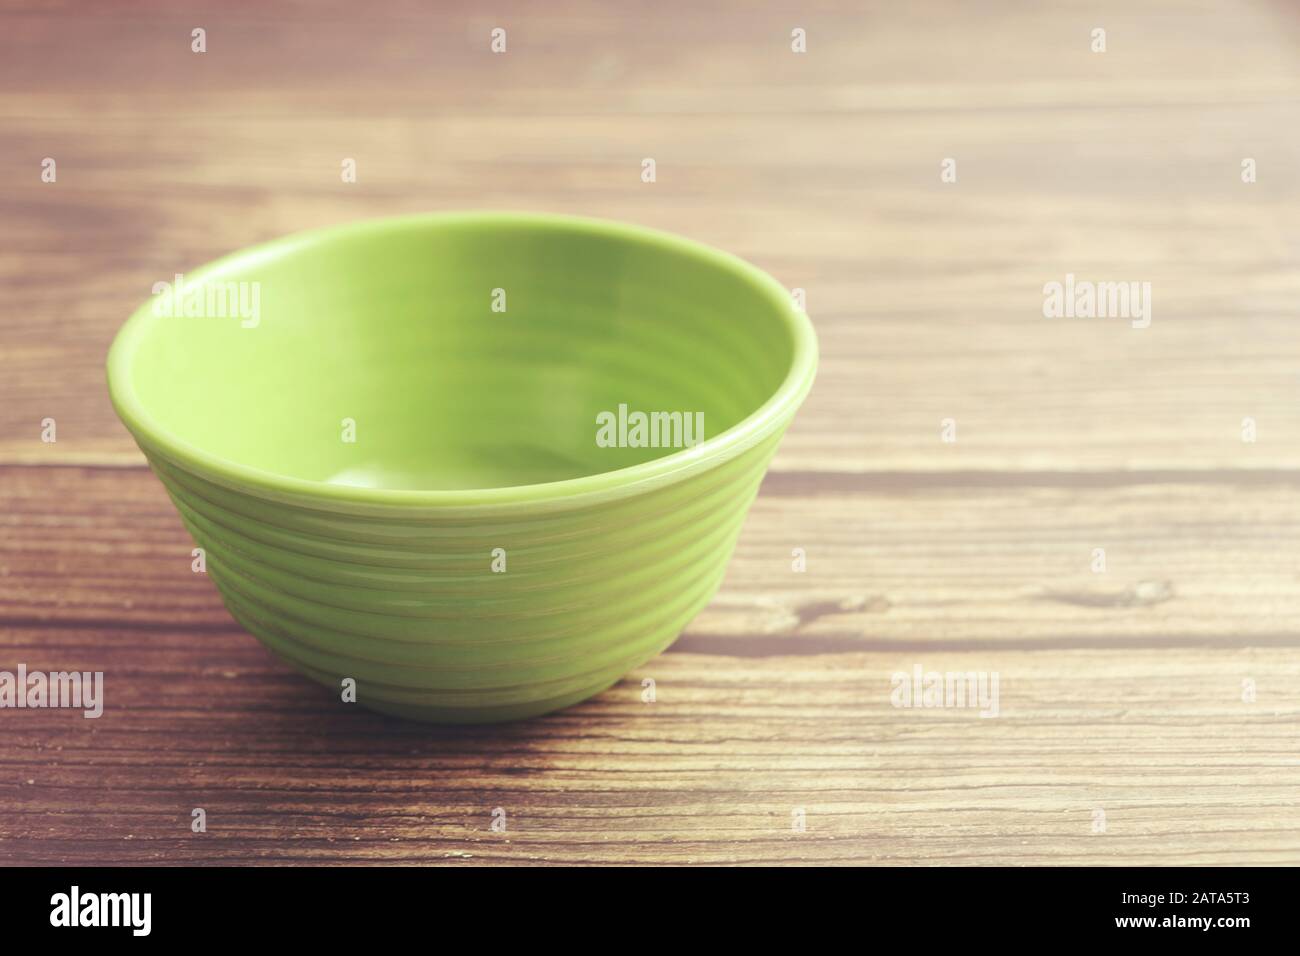 Indian made plastic bowl isolated on wooden table Stock Photo